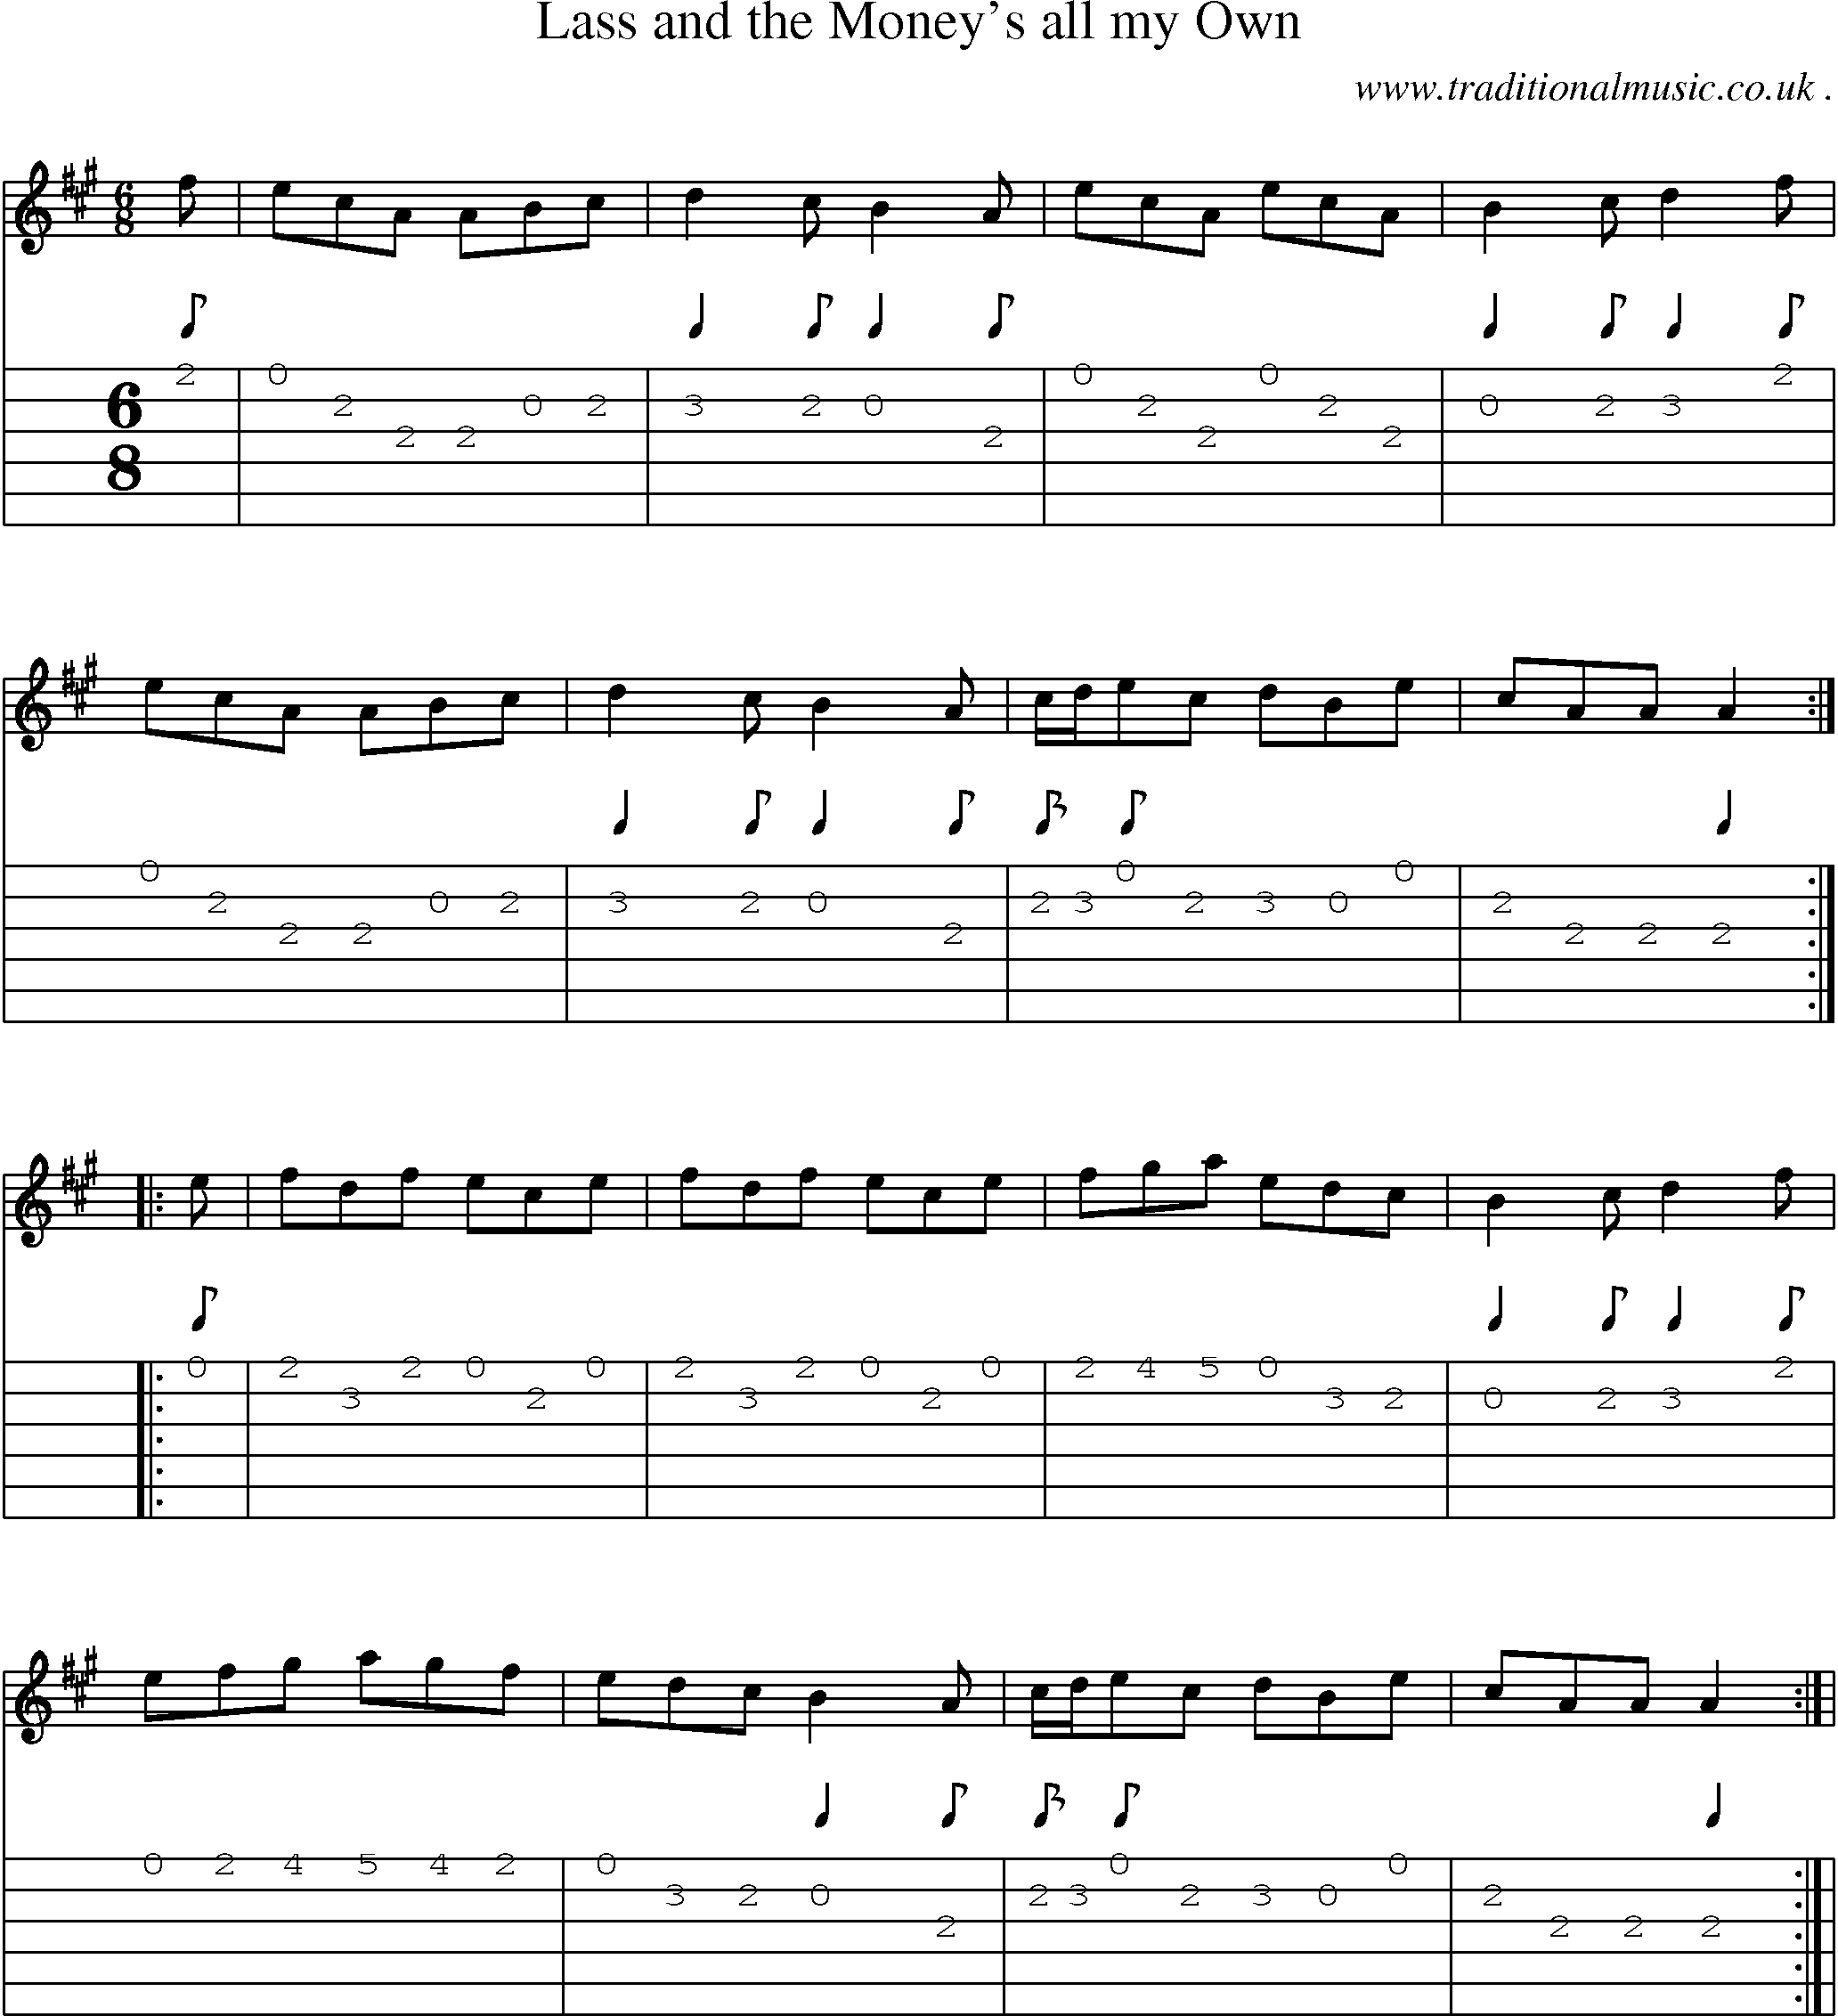 Sheet-Music and Guitar Tabs for Lass And The Moneys All My Own